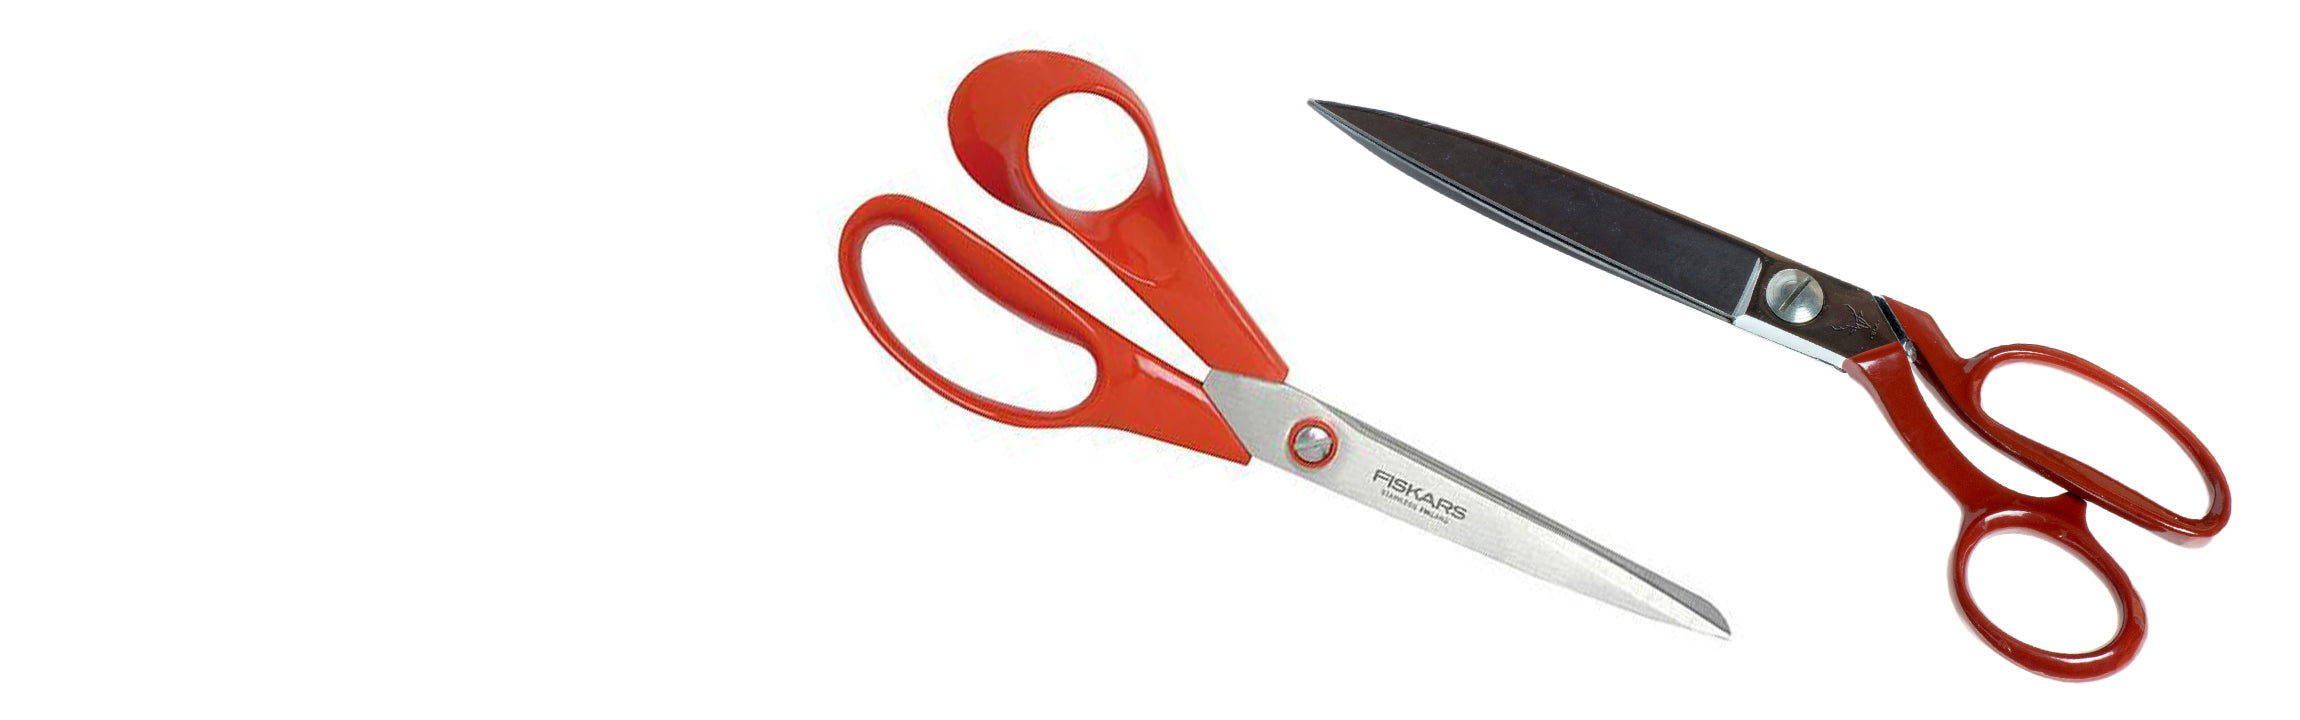 Elk 8 Left Handed Tailors Shears with Lower Serrated Blades